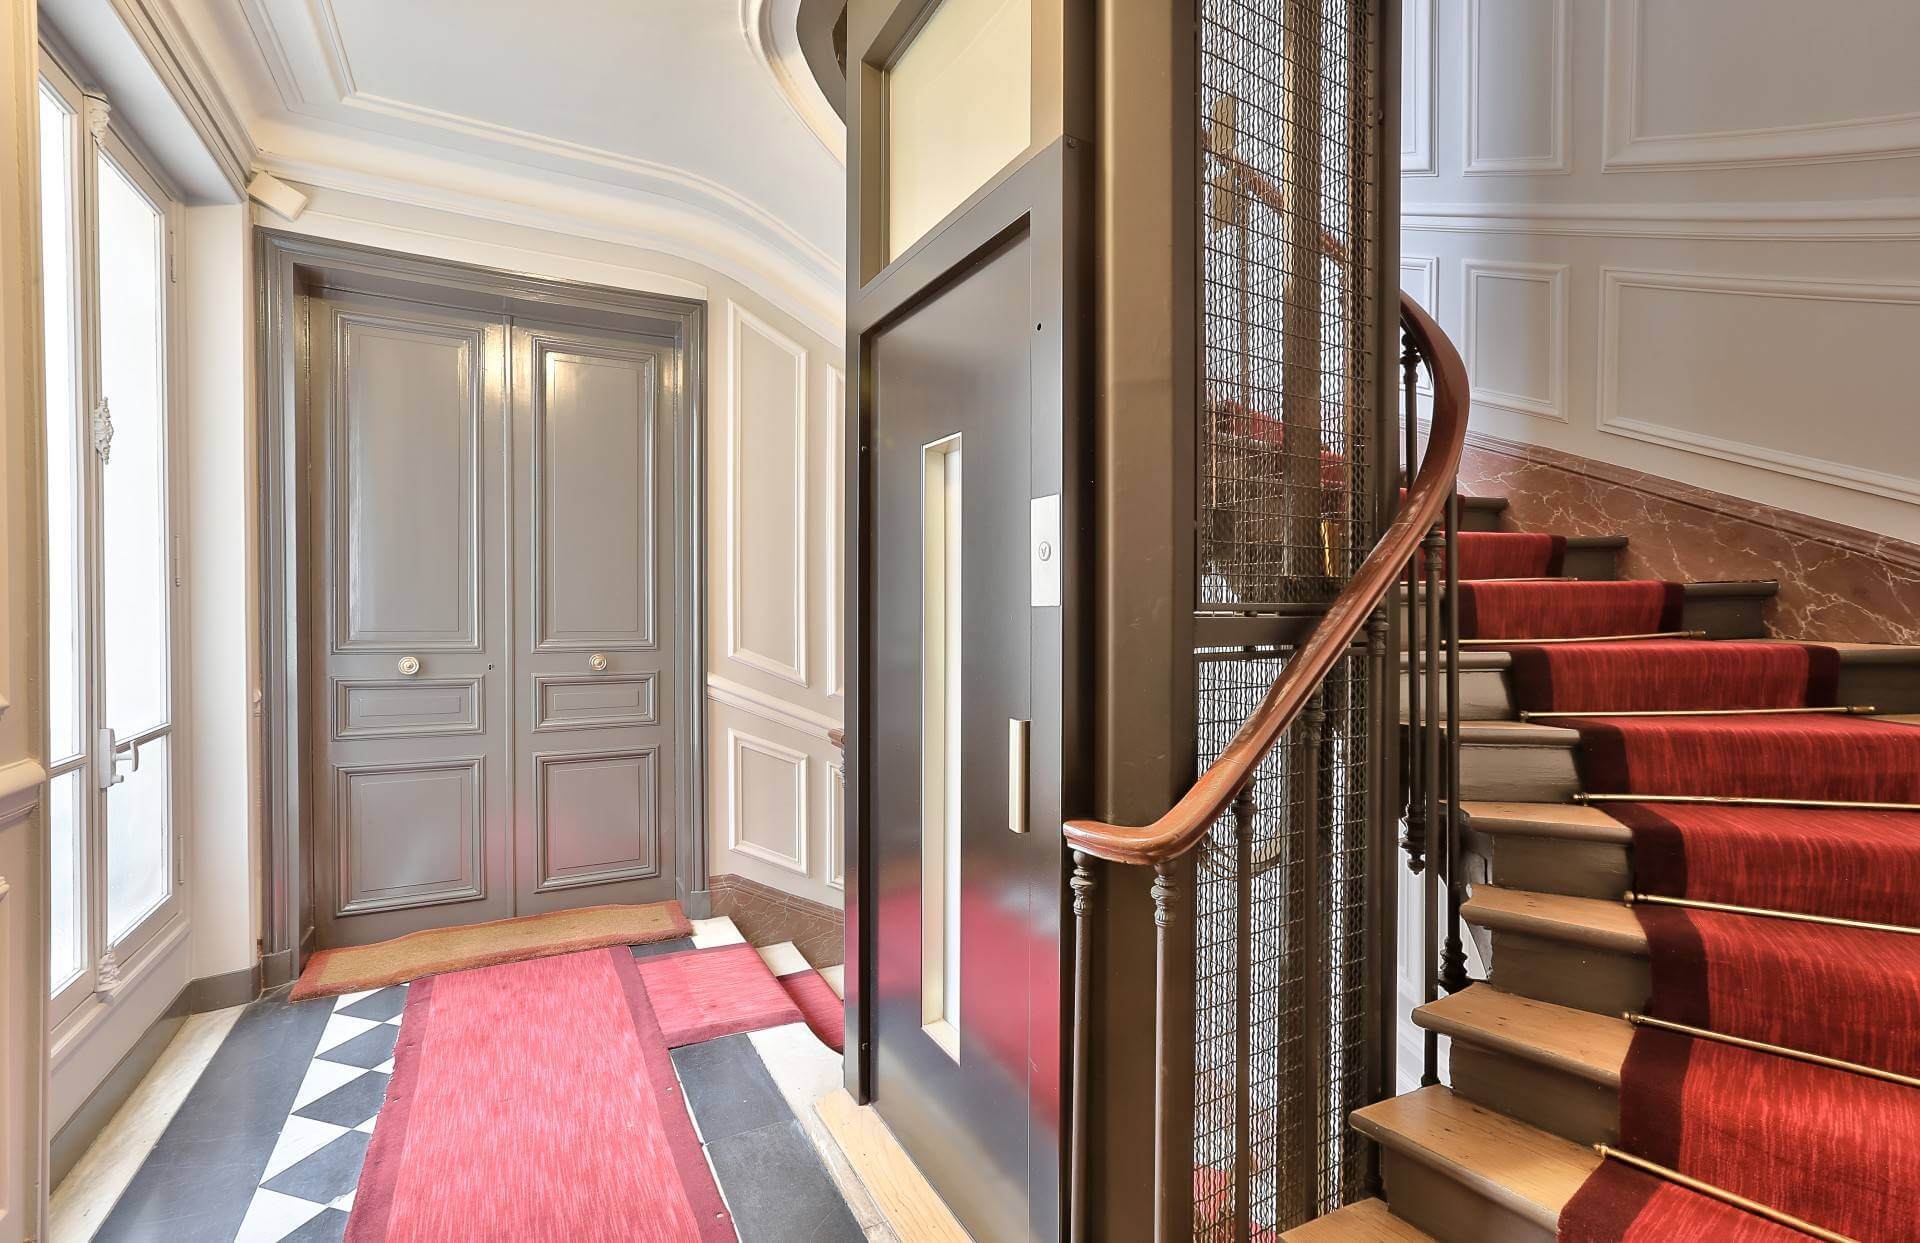 Elevator and staircases in Haussmann buildings in Paris